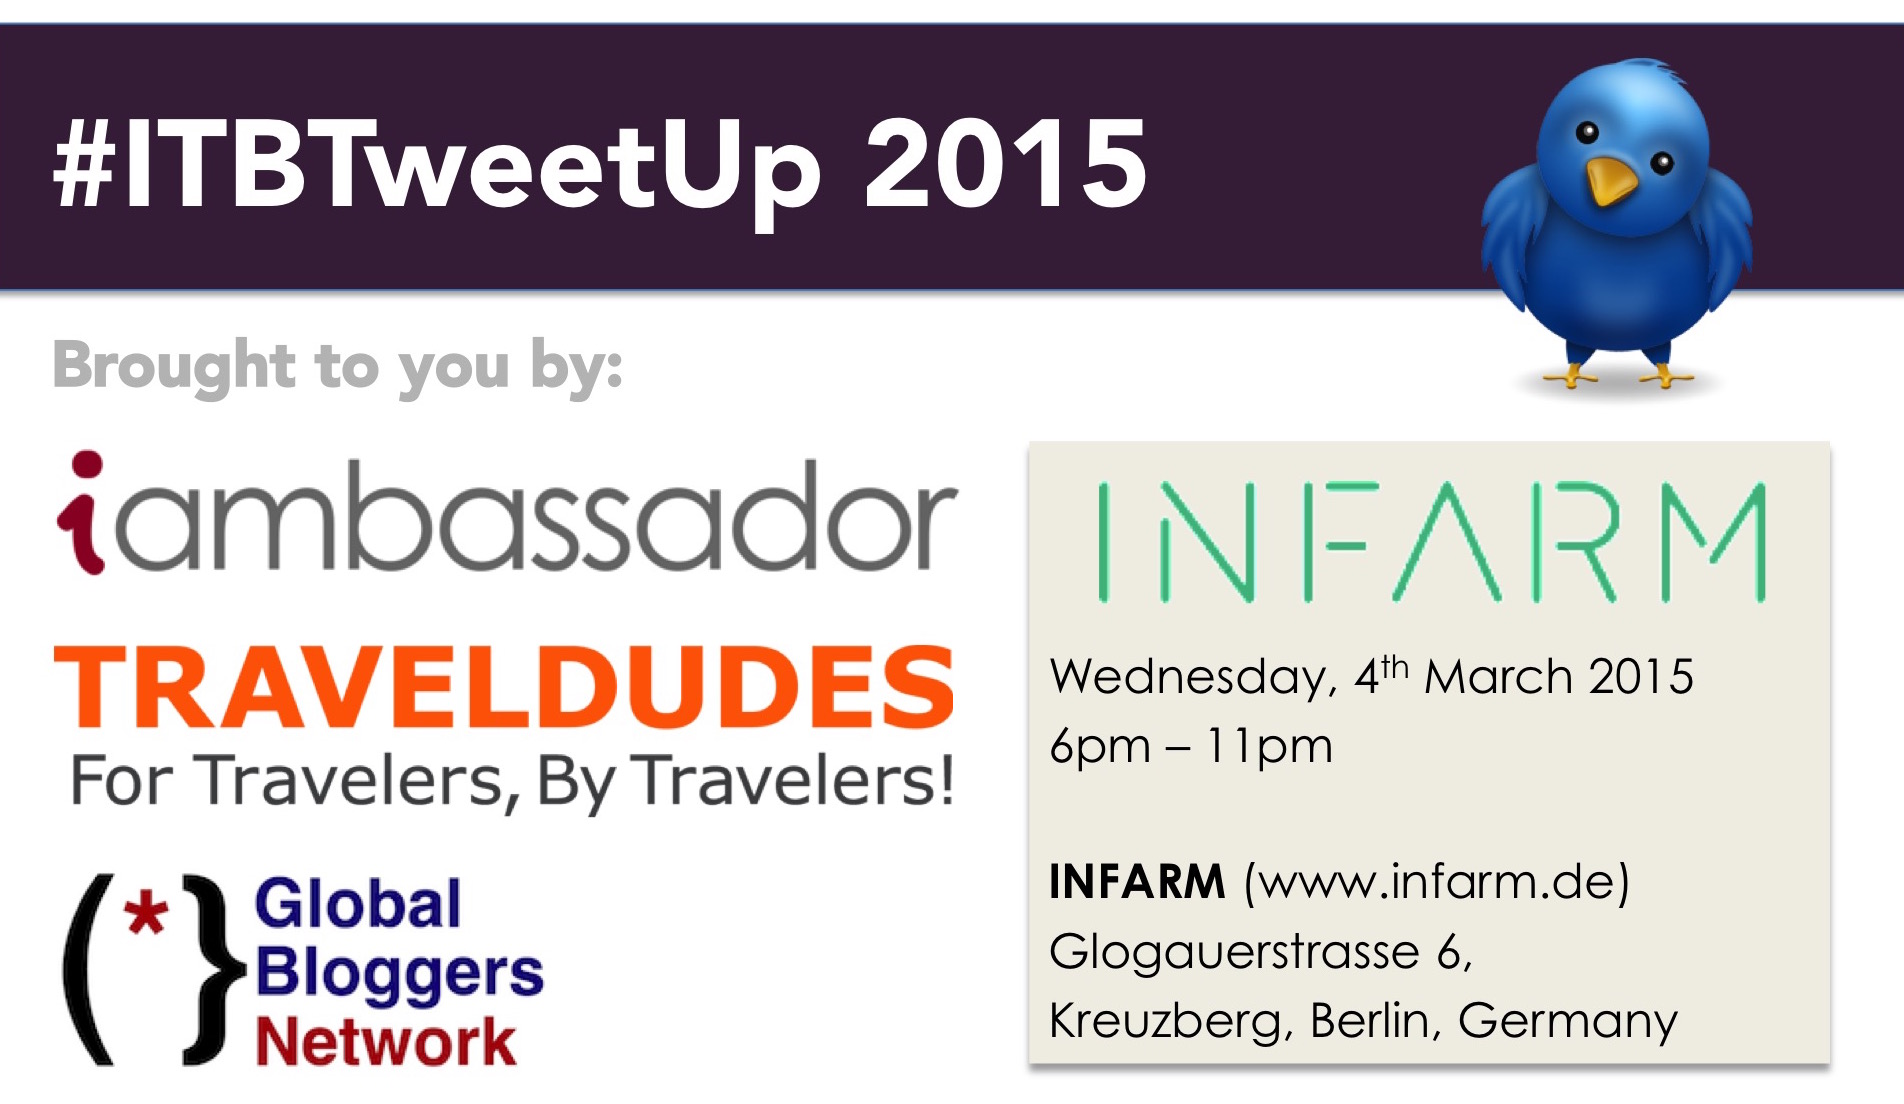 Join us at the ITB Tweet-up 2015 in Berlin